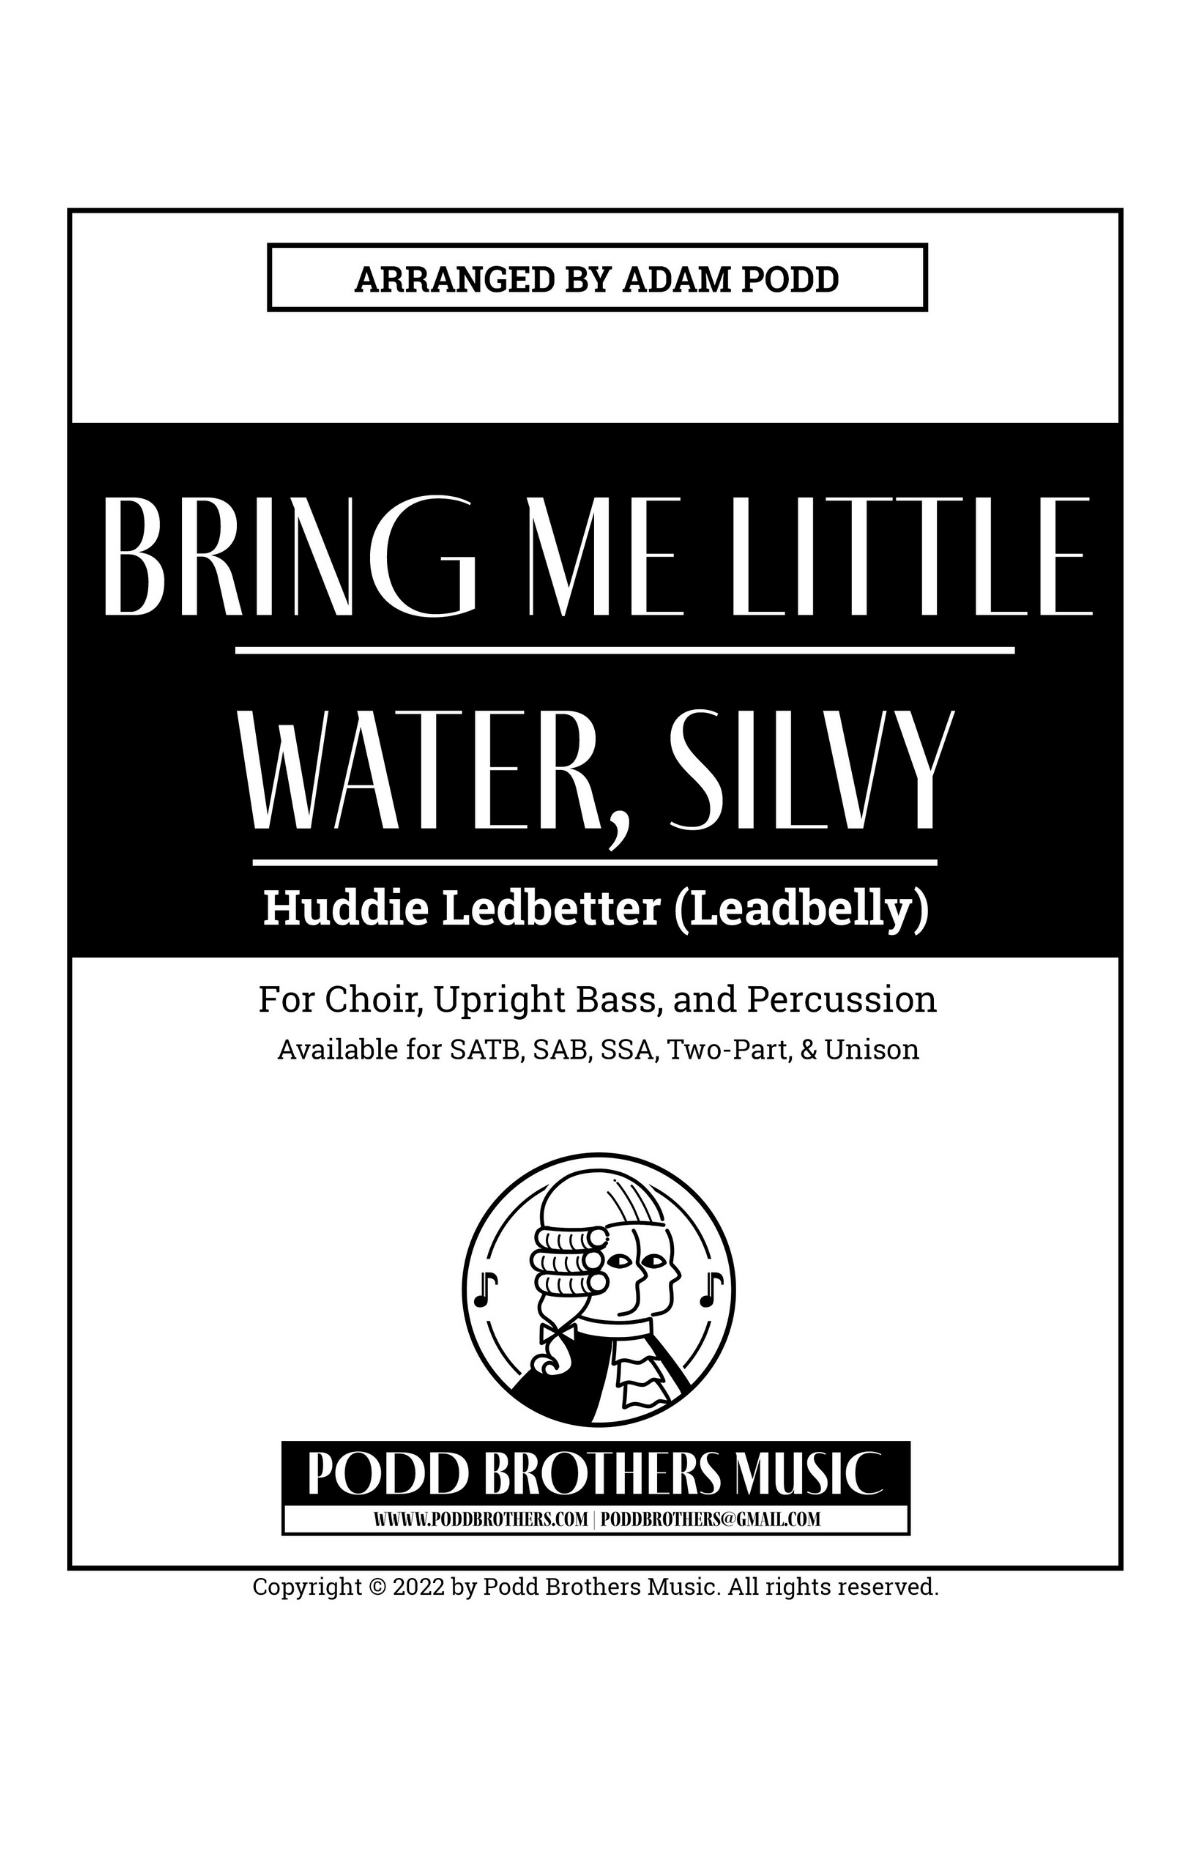 Bring Me Little Water: 2-Part: Special Order